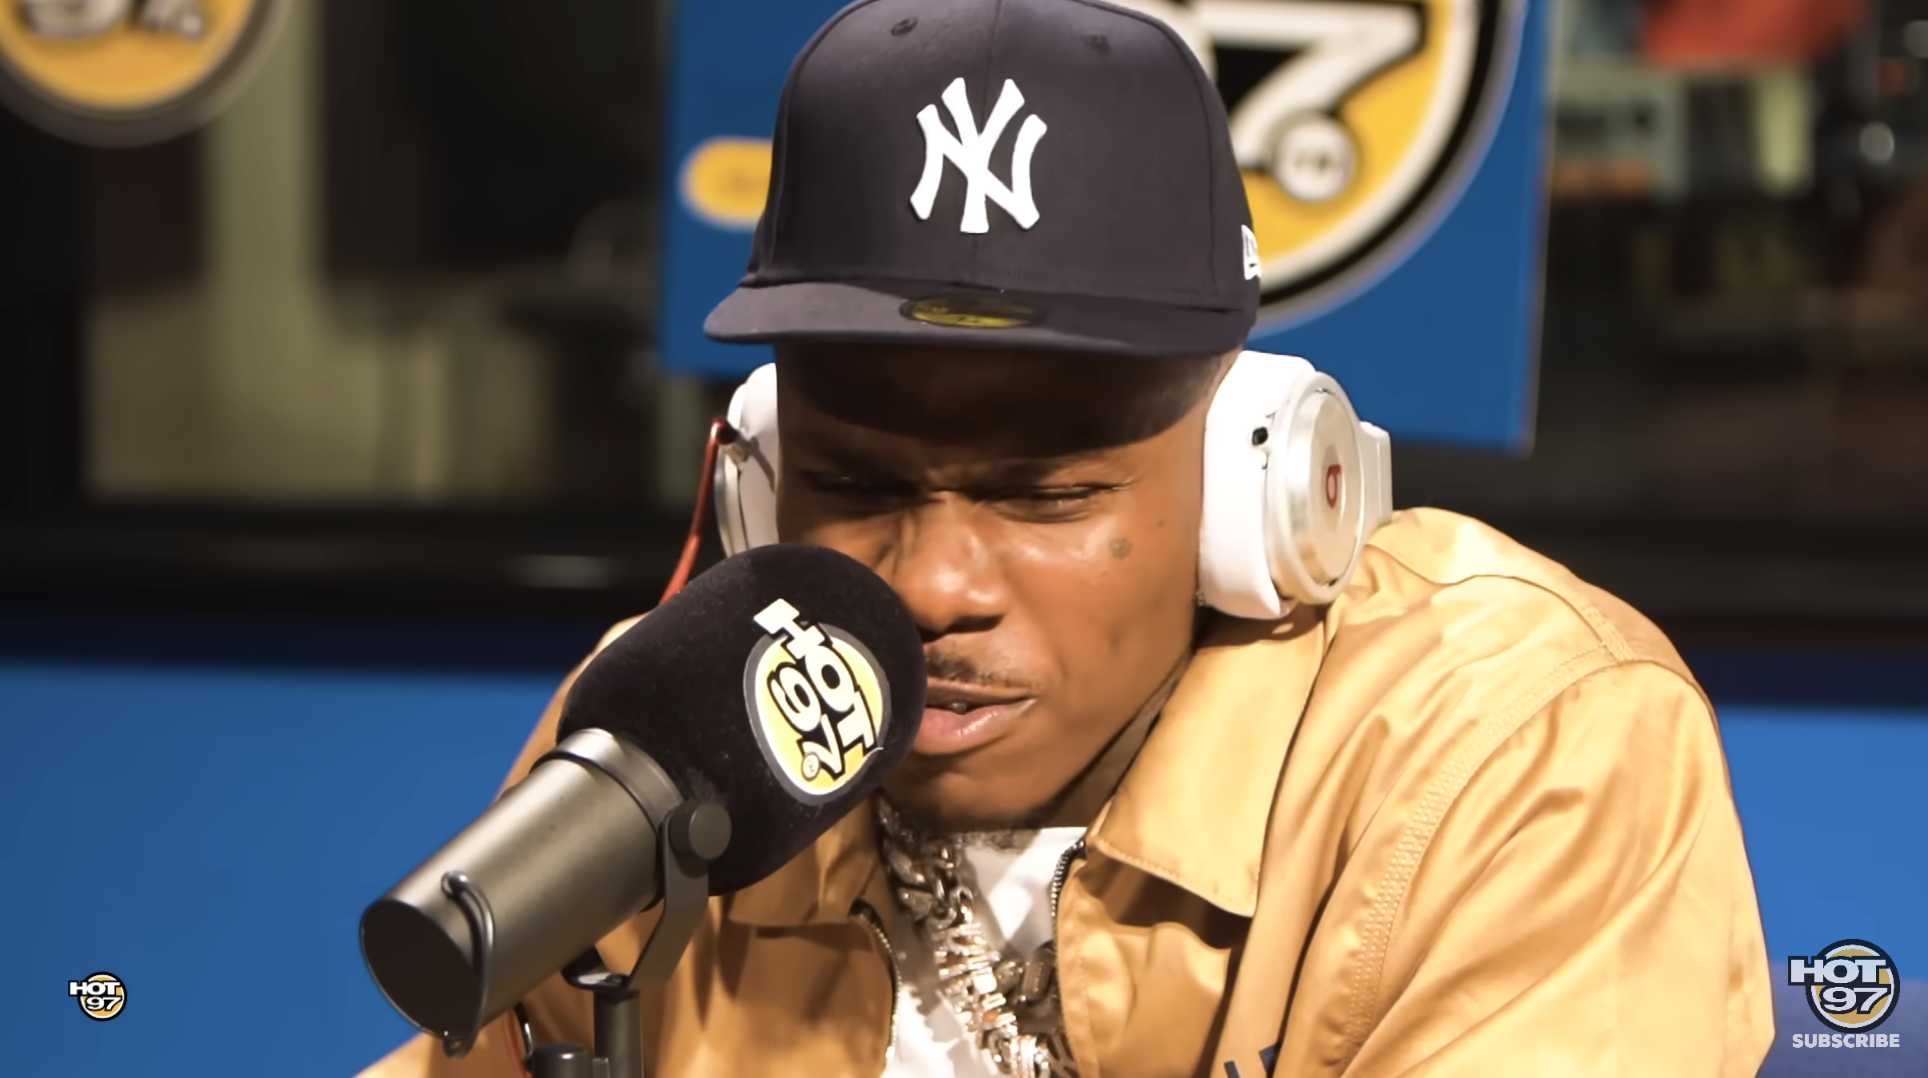 DaBaby Takes On The Game & 50 Cent’s “Hate It Or Love It” For Funk Flex Freestyle